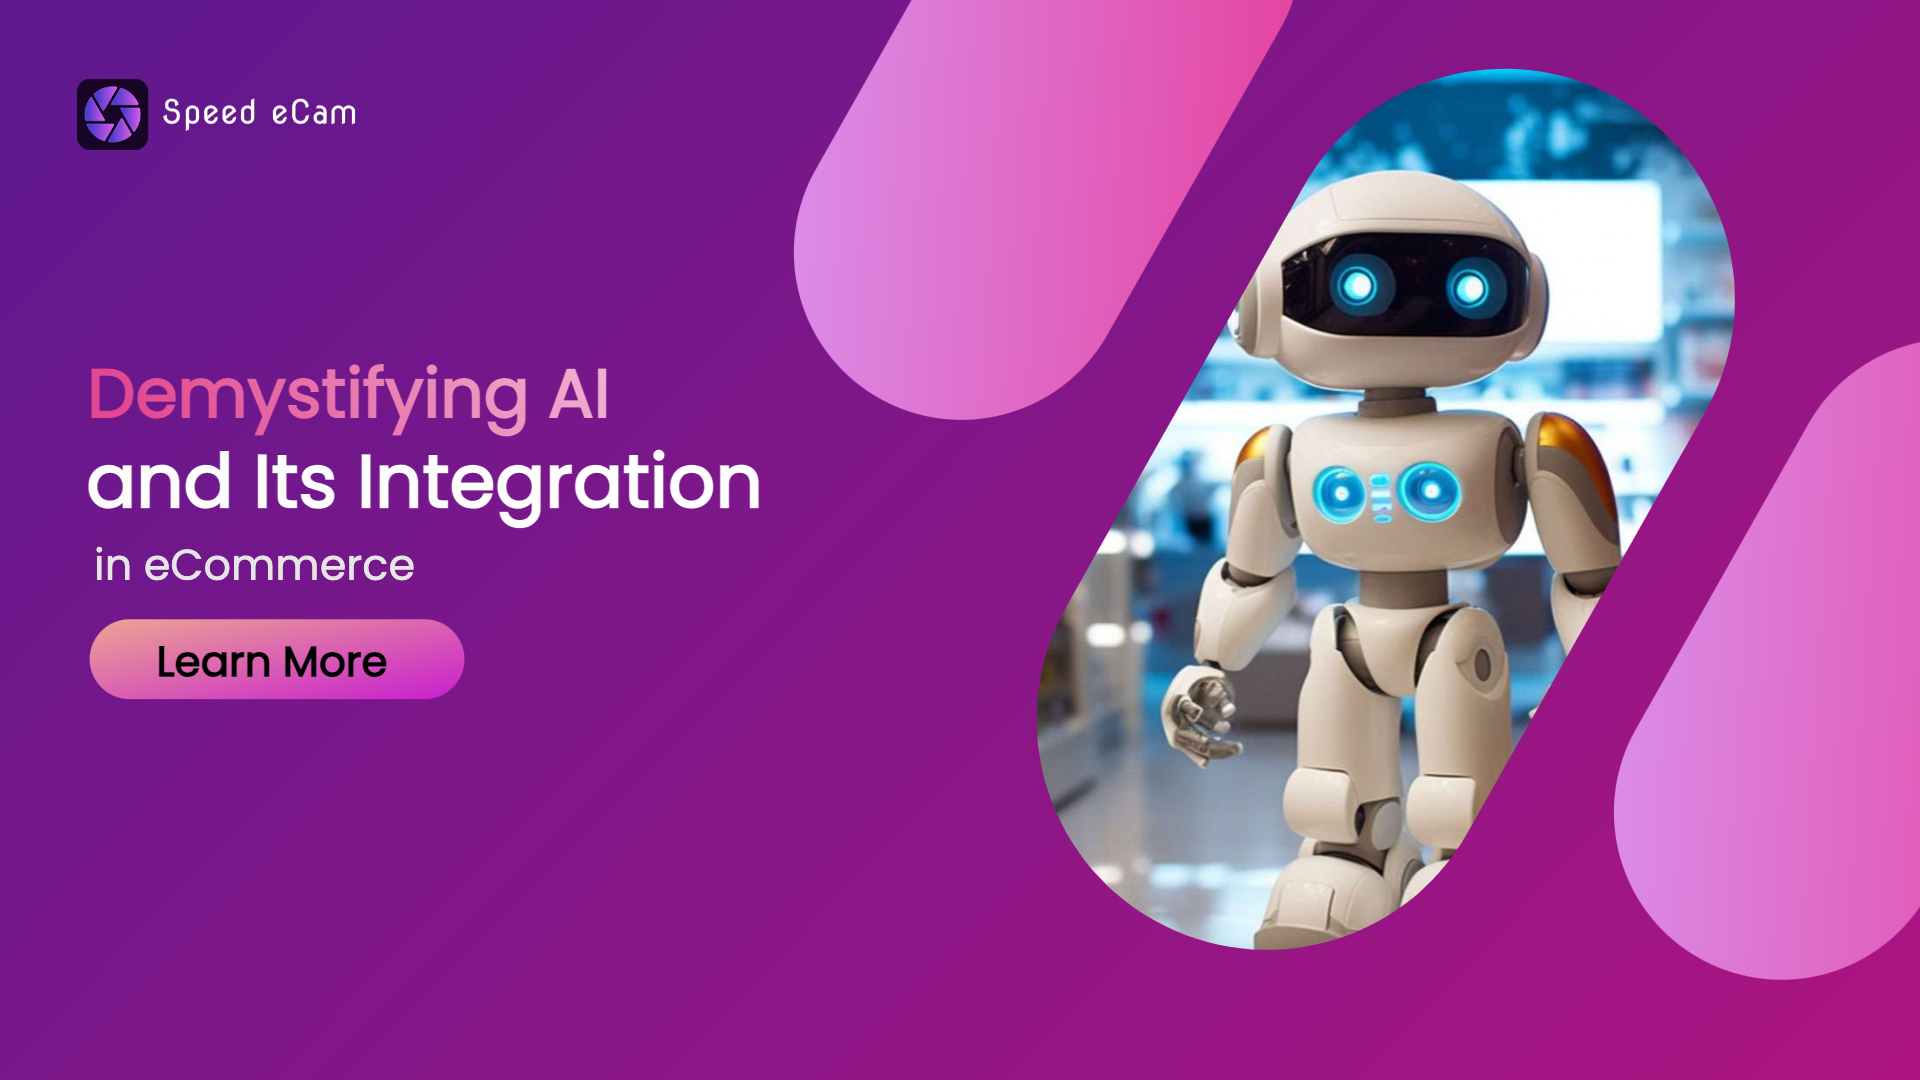 Demystifying AI and Its Integration in eCommerce